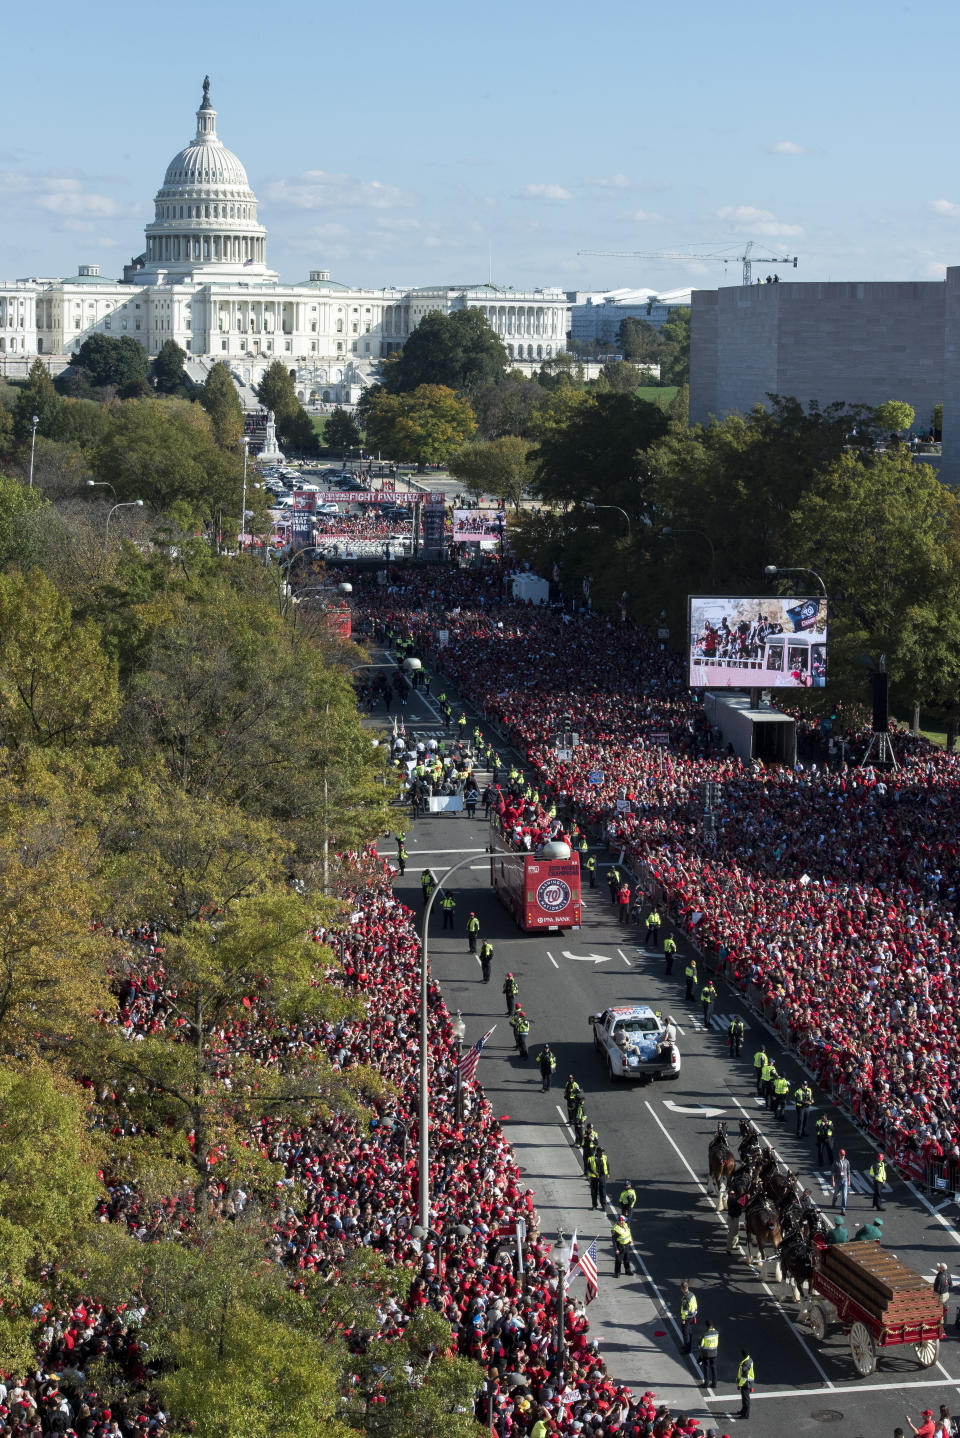 With the Capitol in the background, the MLB Washington Nationals celebrate the team's World Series baseball championship over the Houston Astros, with their fans in Washington, Saturday, Nov. 2, 2019. The Washington Nationals are getting a hero's welcome home from a city that had been thirsting for a World Series championship for nearly a century.(AP Photo/Cliff Owen)